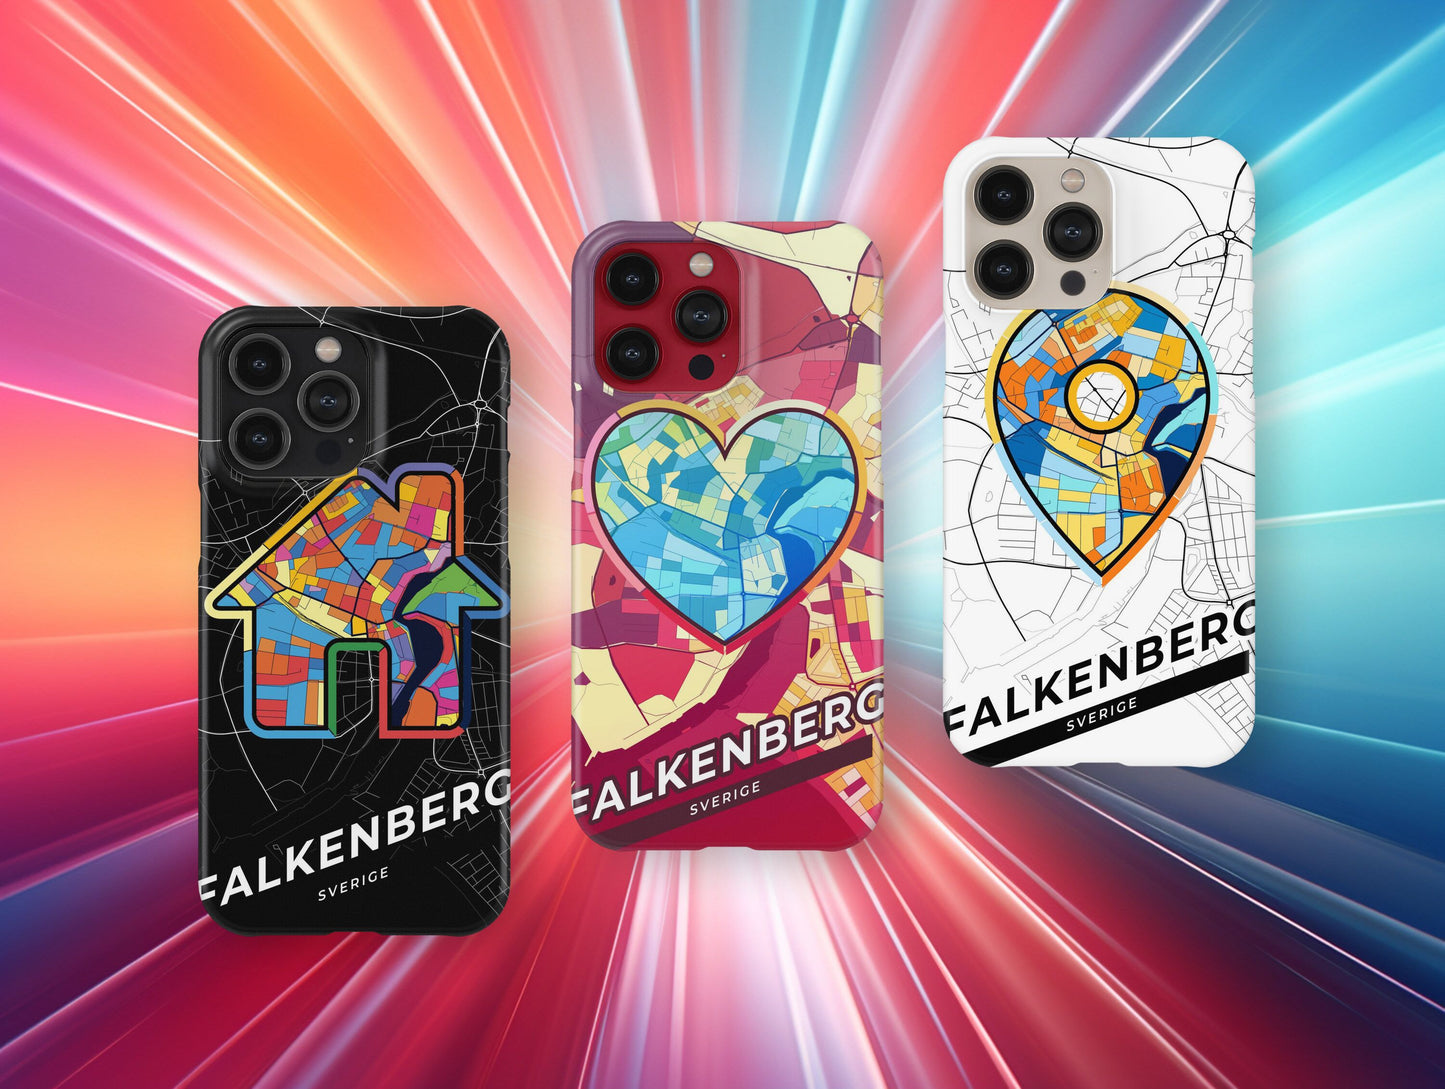 Falkenberg Sweden slim phone case with colorful icon. Birthday, wedding or housewarming gift. Couple match cases.